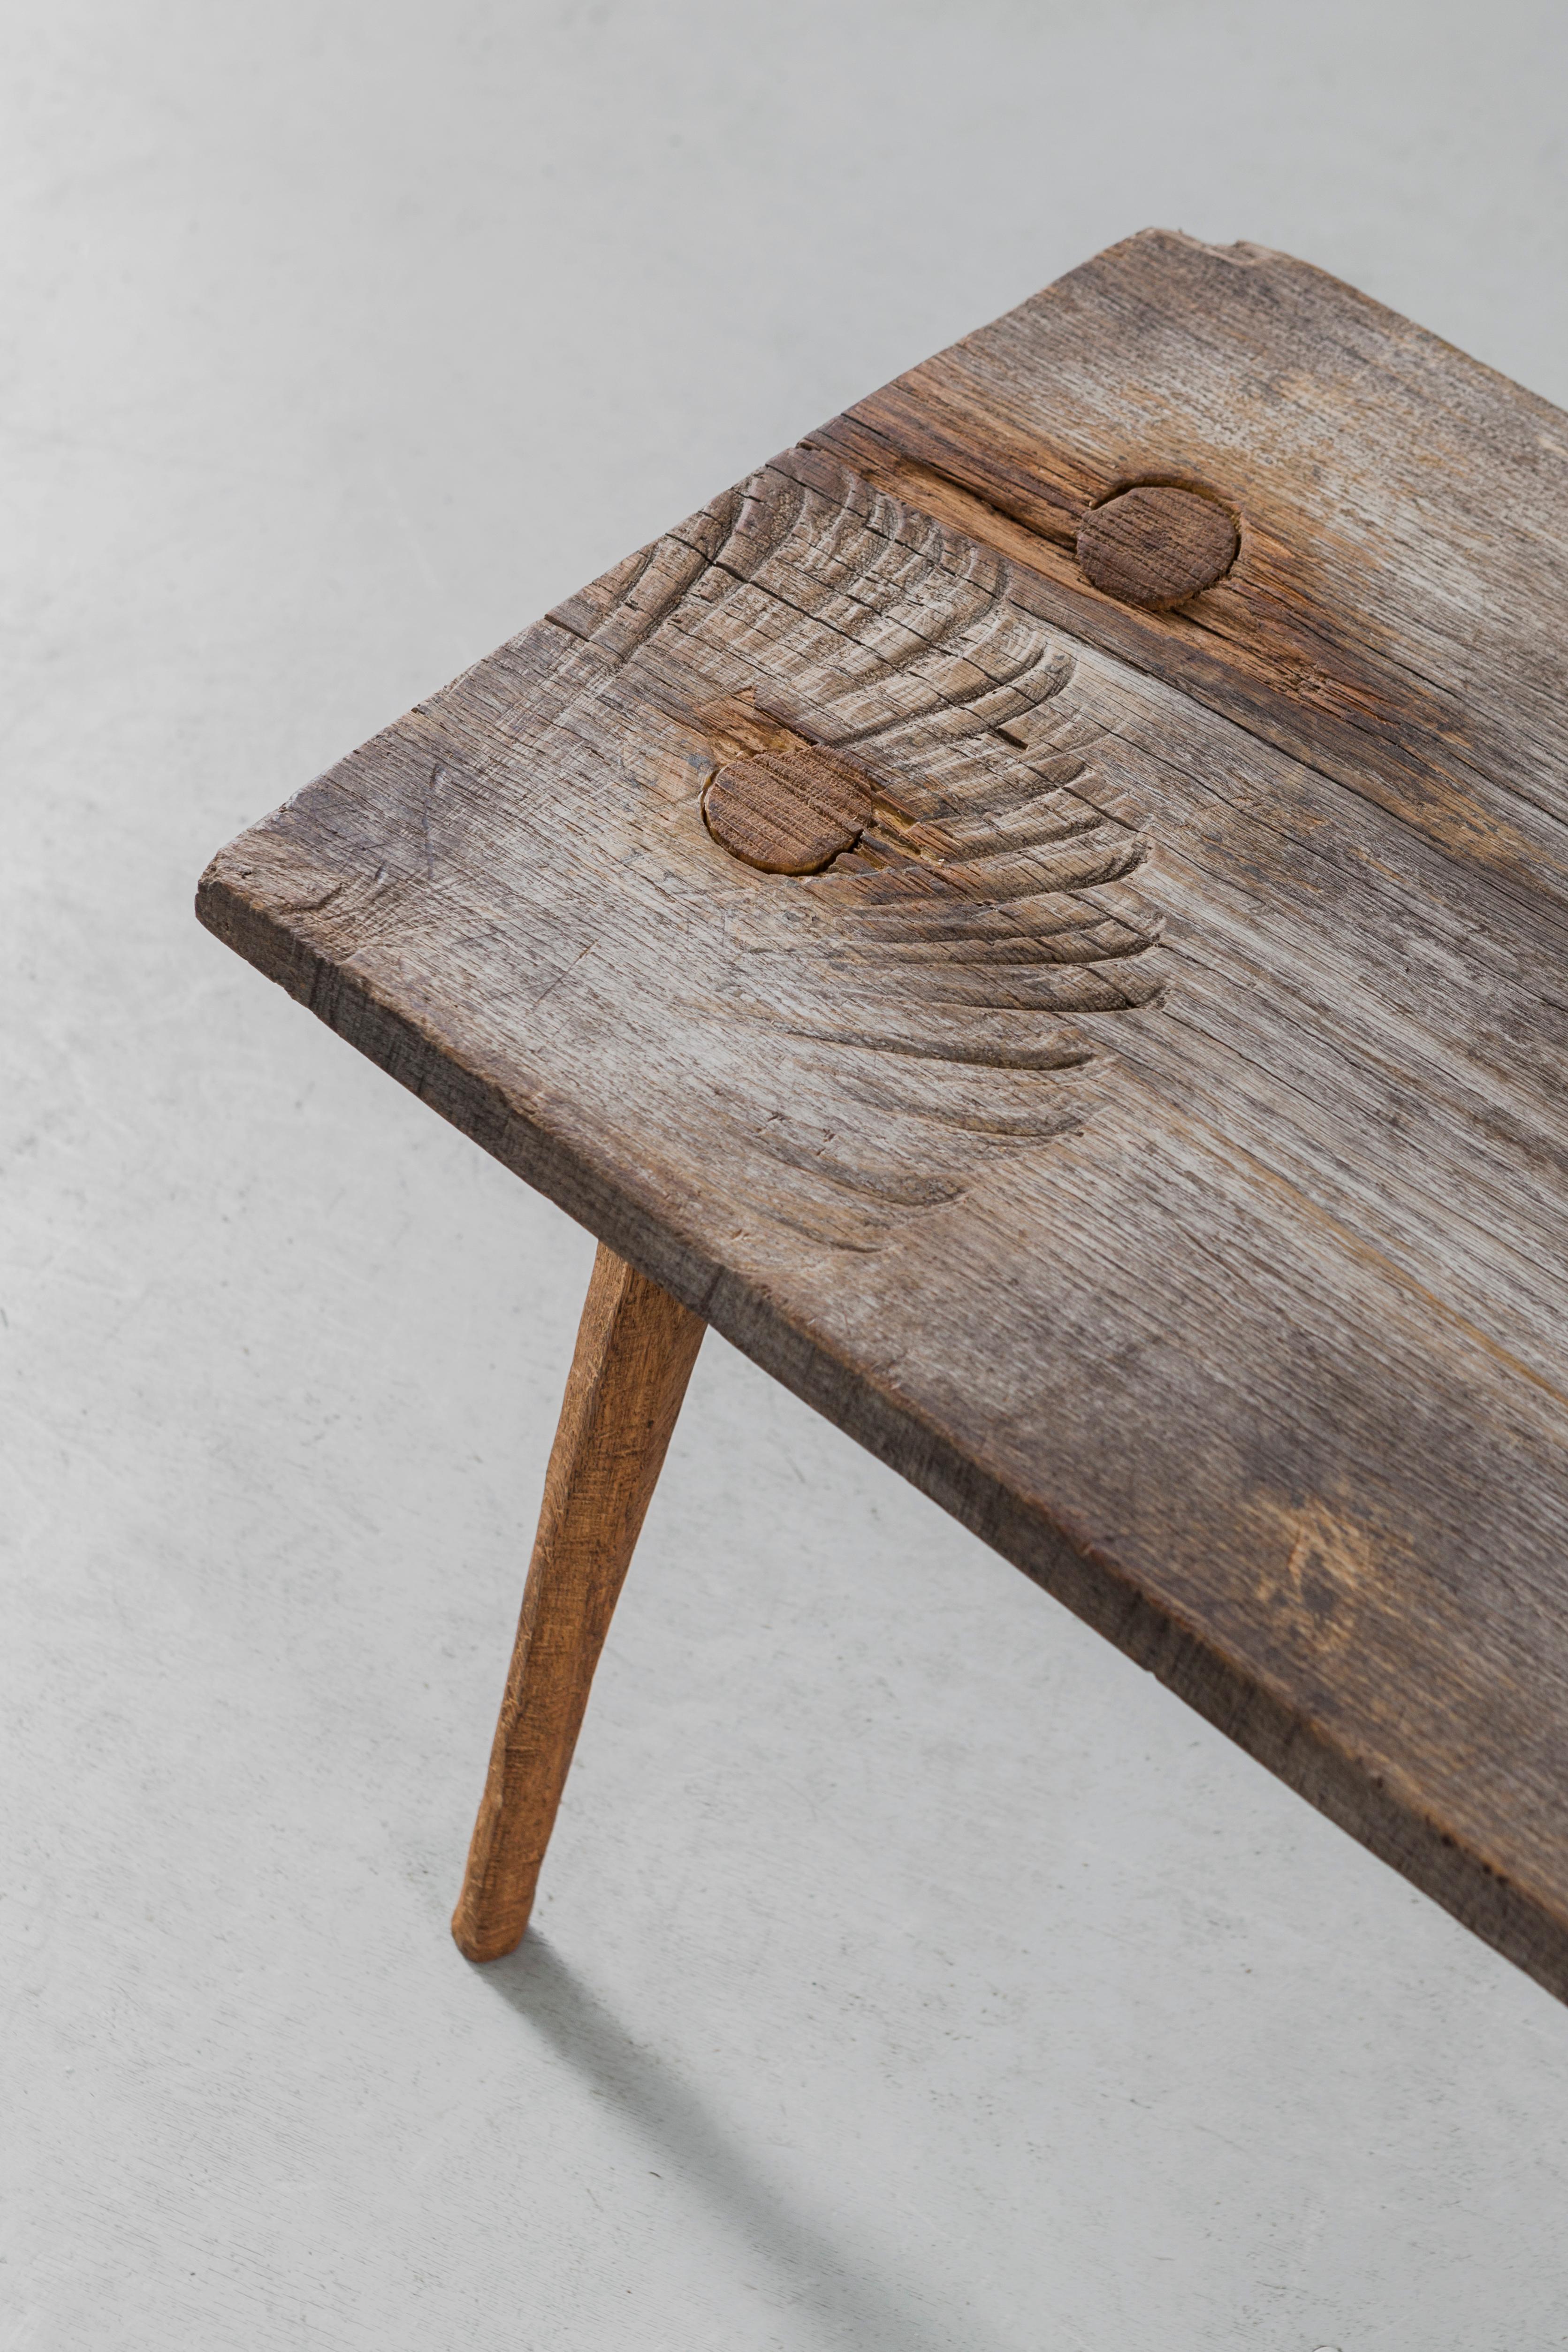 Small table made of solid oak (+ linseed oil)
Measures: 45 x 73 x 40 cm

SÓHA design studio conceives and produces furniture design and decorative objects in solid oak in an authentic style. Inspiration to create all these items comes from the